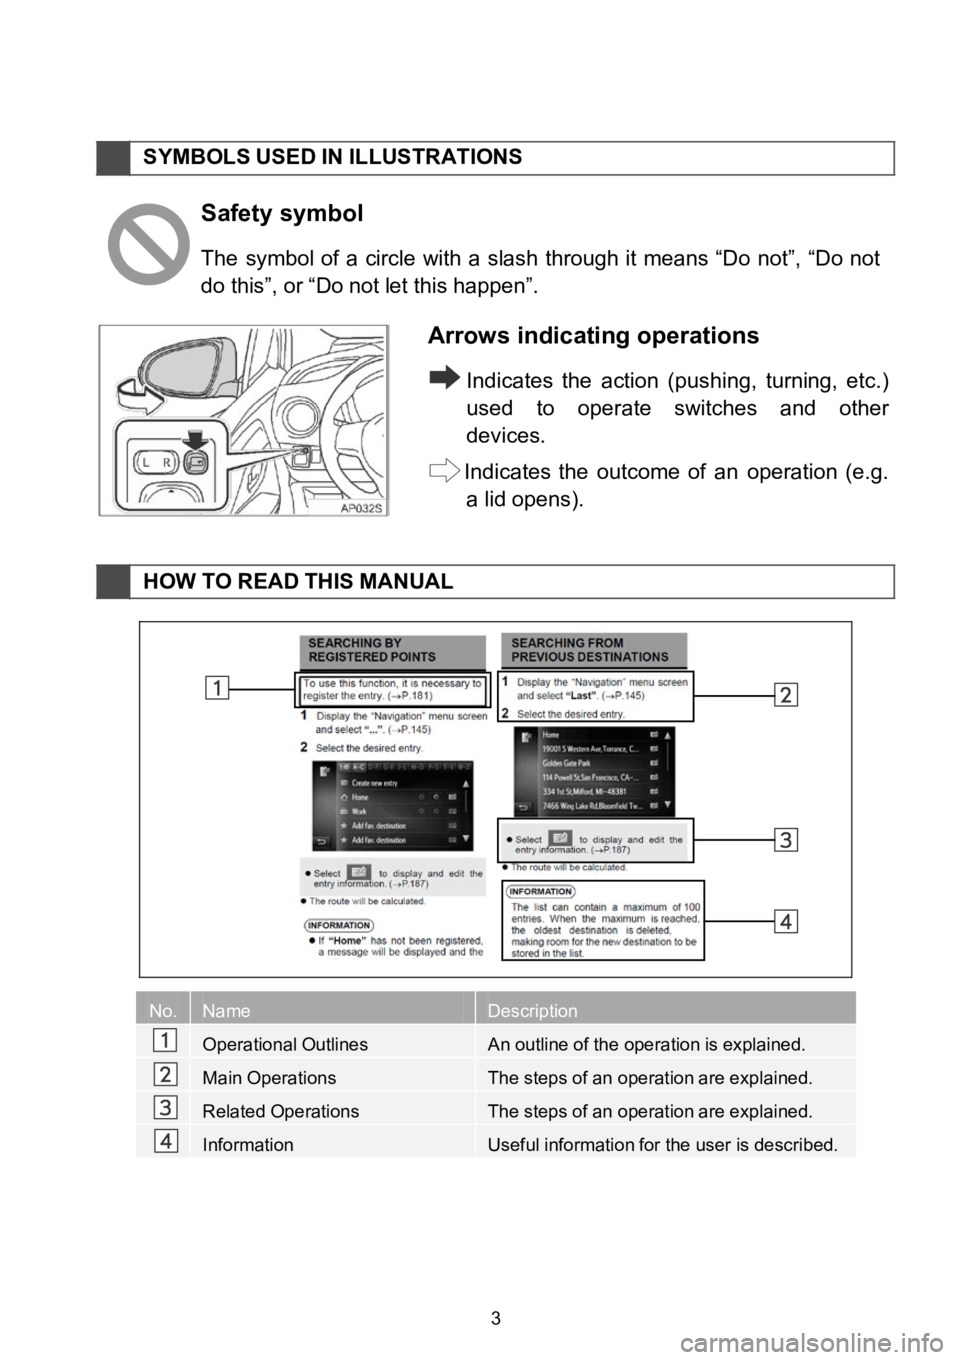 TOYOTA COROLLA iM 2018  Accessories, Audio & Navigation (in English) SYMBOLS USED INILLUSTR ATIONS
Safety symbol
Thesymbol ofa c ircle witha slash through itmeans “Donot”, “Donot 
do this”, or “Donotletthis happen”.
Arrows indicating operatio ns
Indicates t